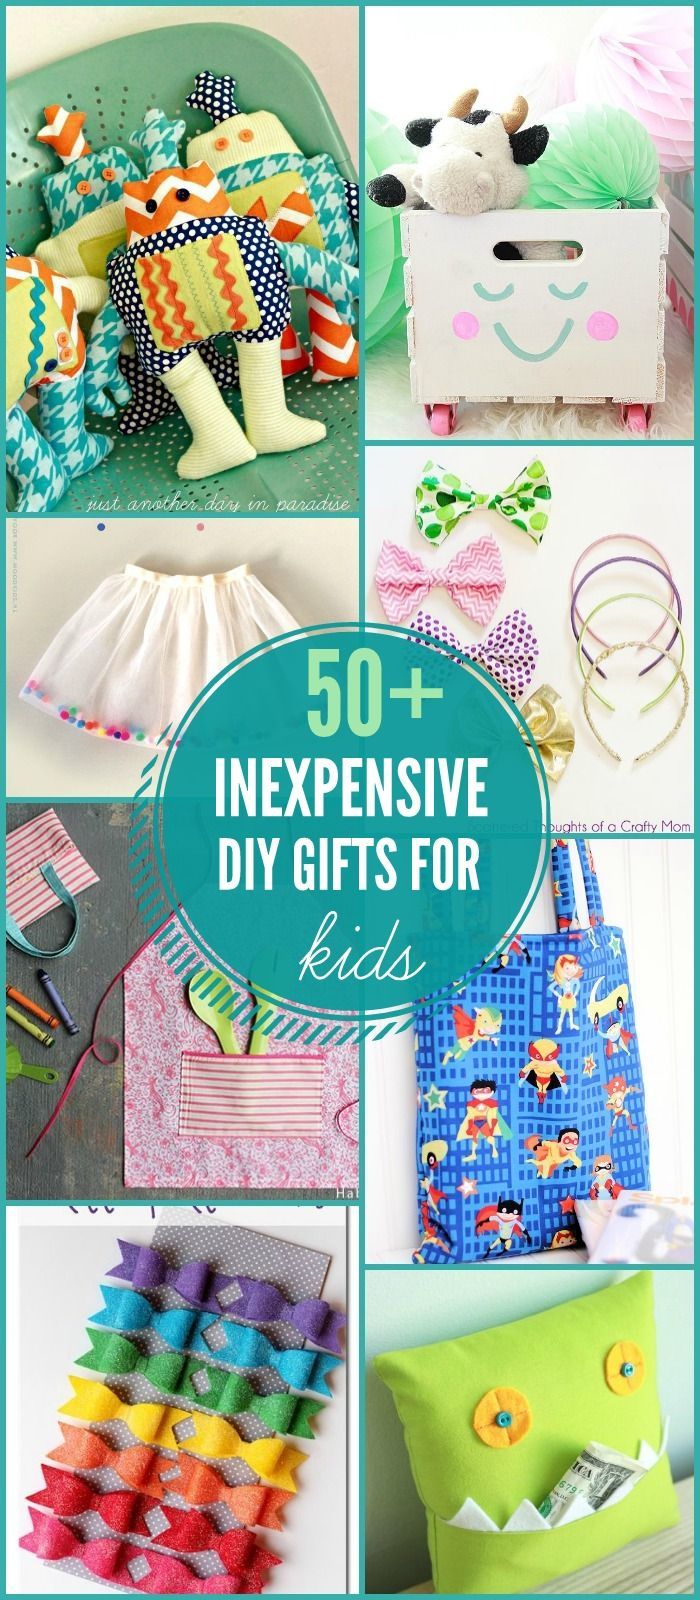 75+ DIY Gifts For Kids -   19 diy Gifts for children ideas